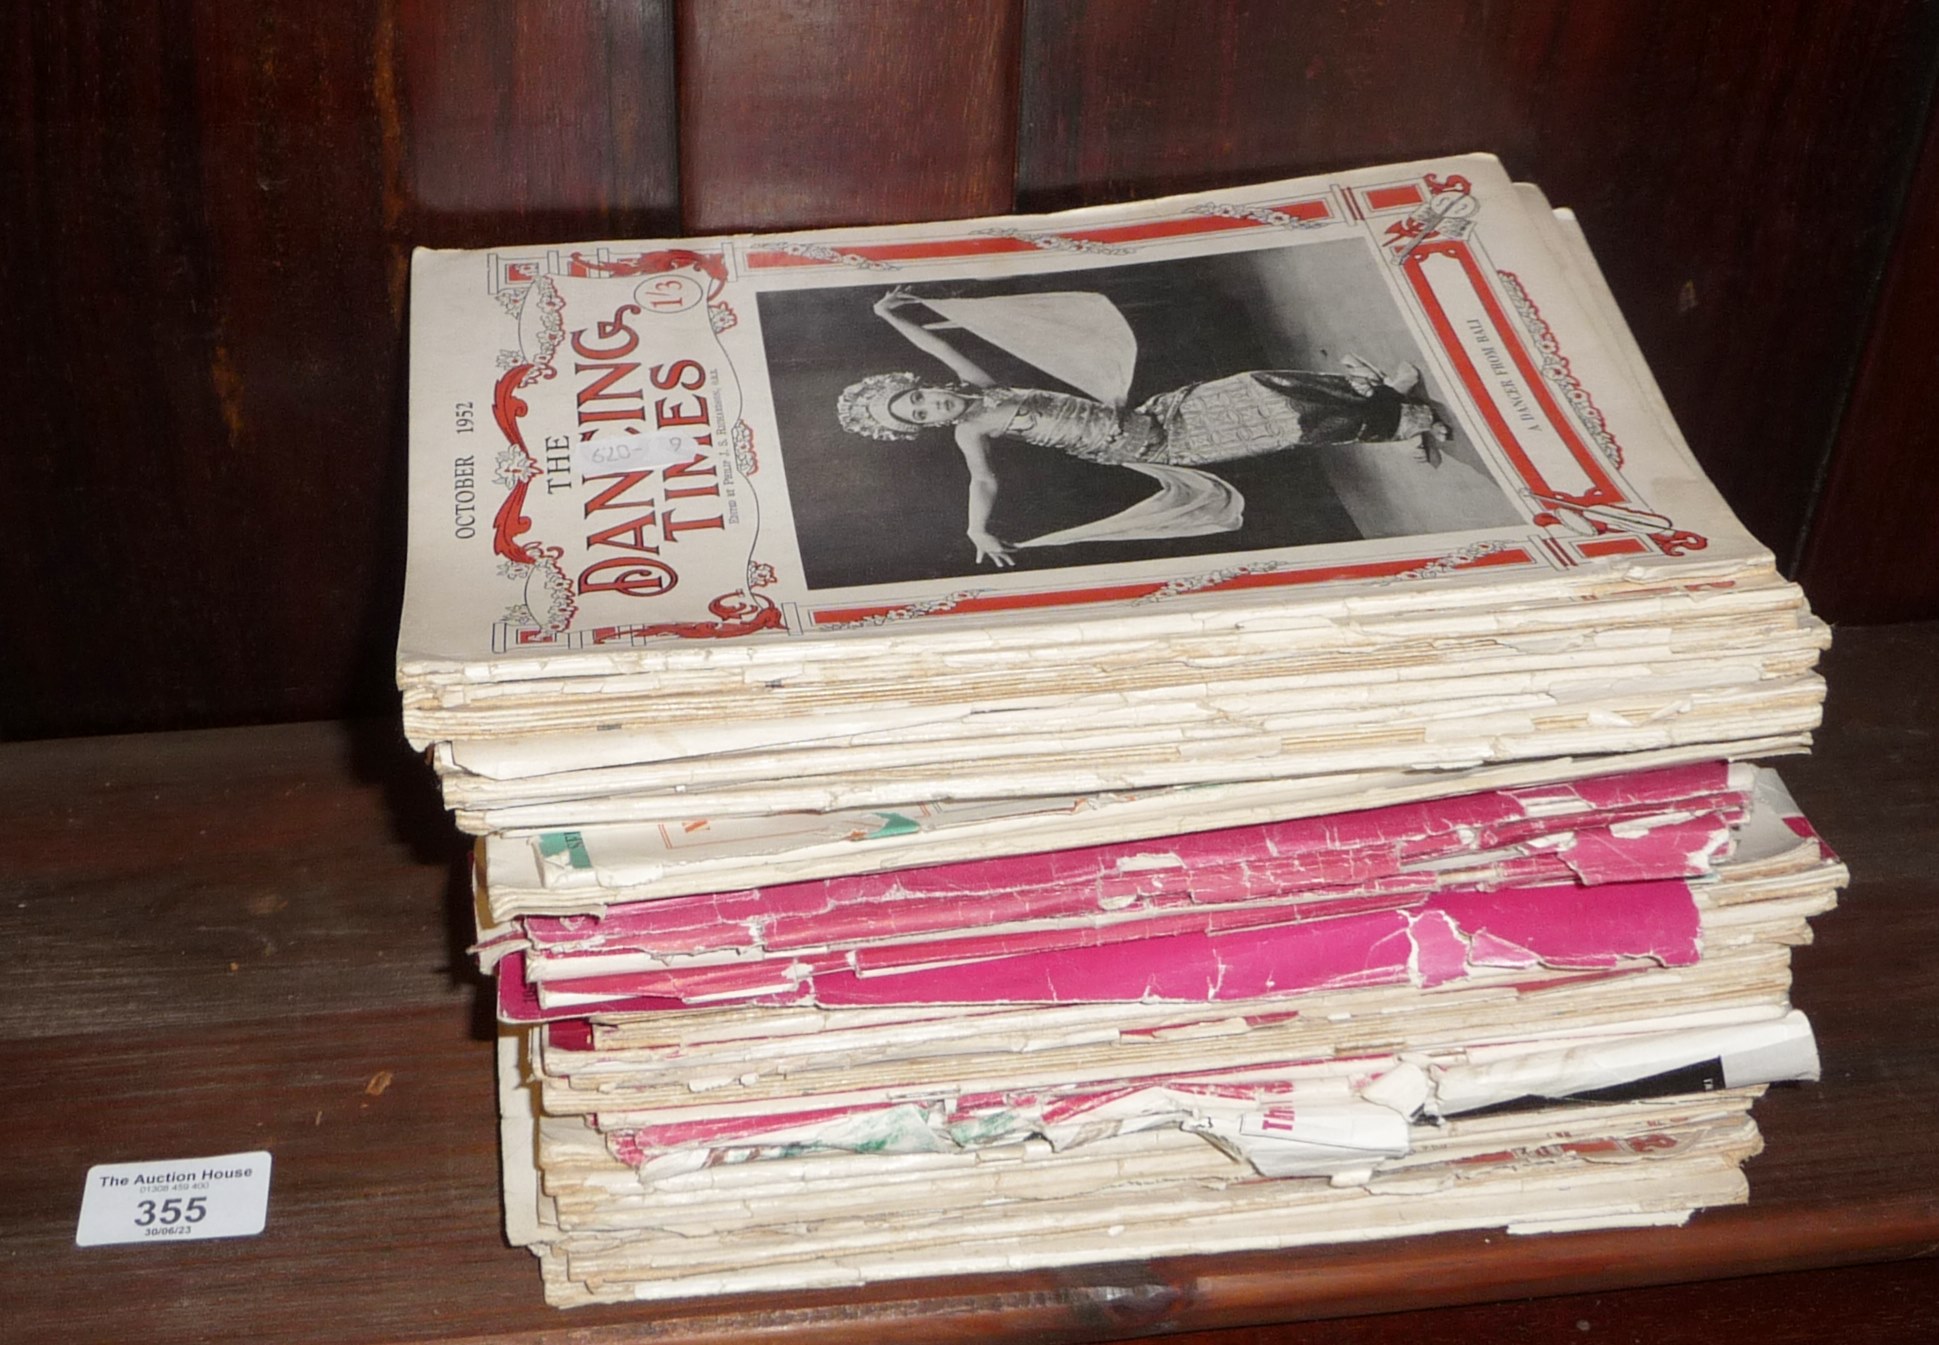 A quantity of "The Dancing Times" magazines, c. 1950s